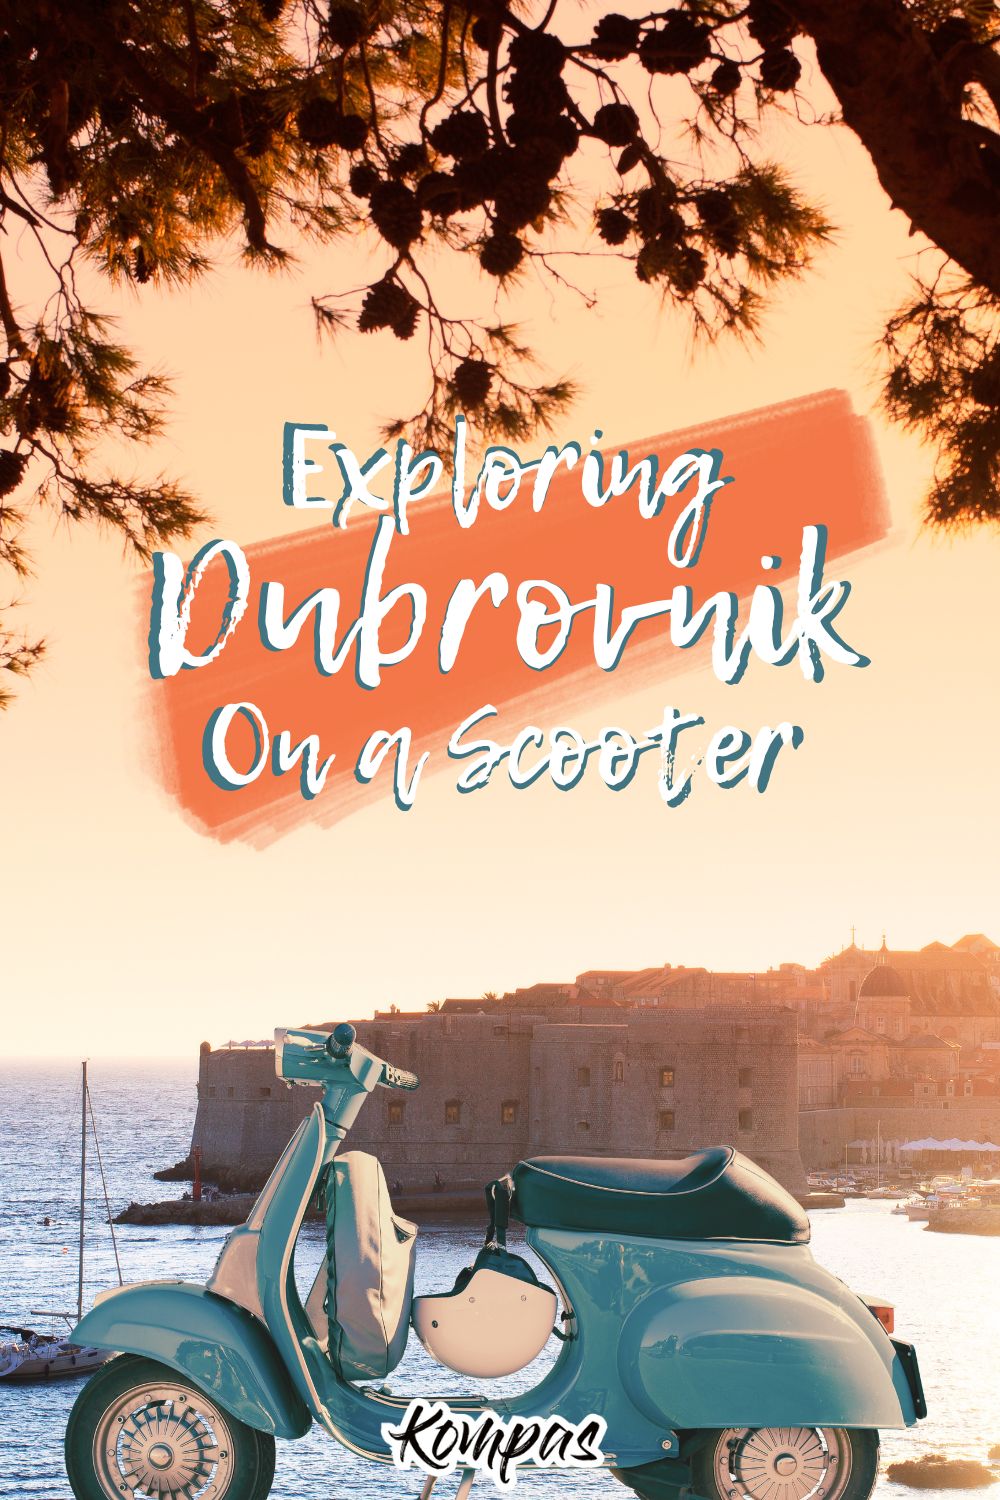 Exploring Dubrovnik on a Scooter